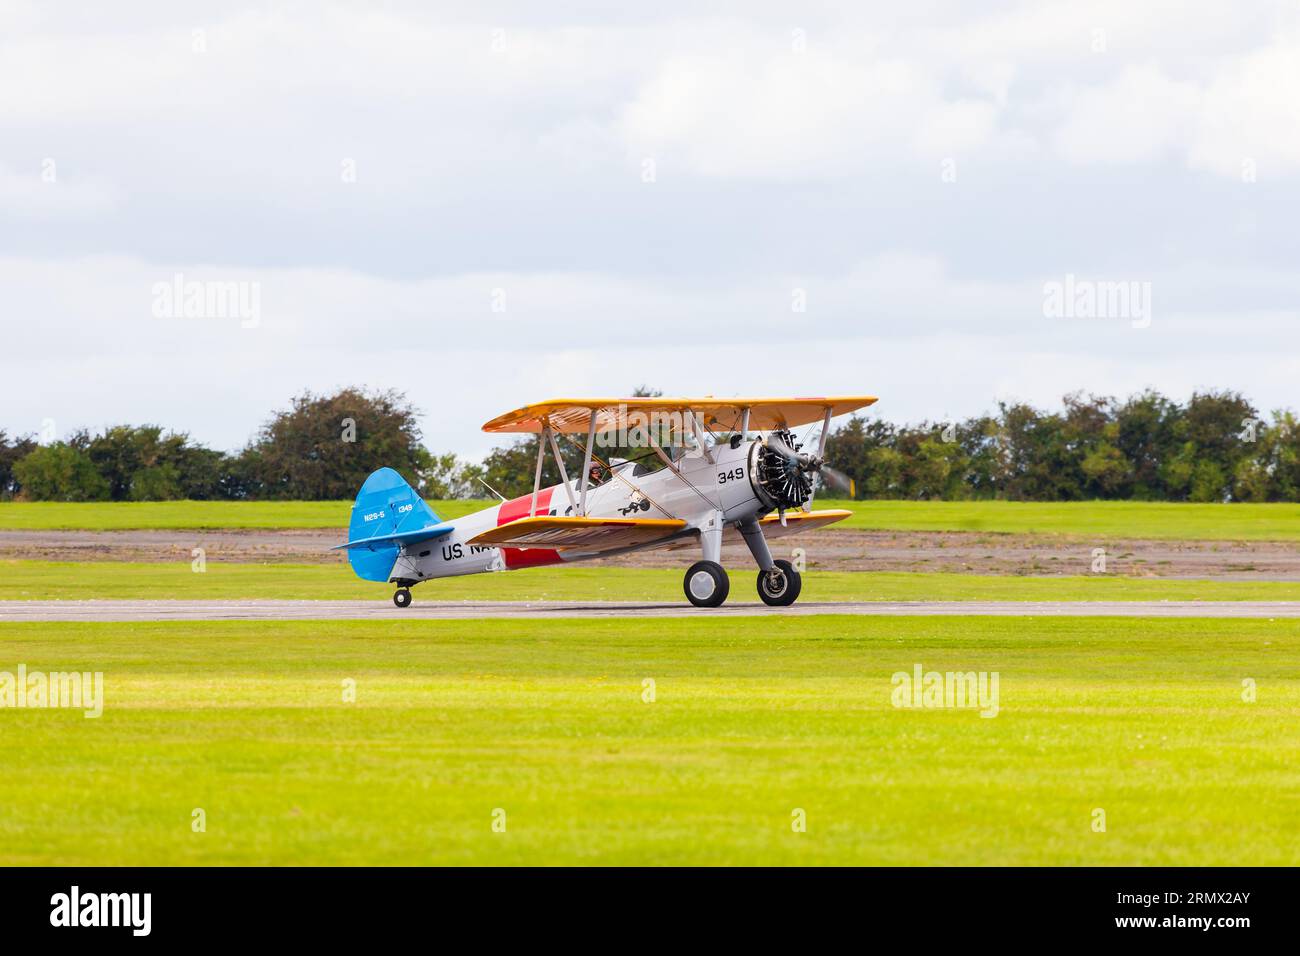 Boeing stearman Kaydet bi plane trainer of the US Navy lines up for take off. Stock Photo